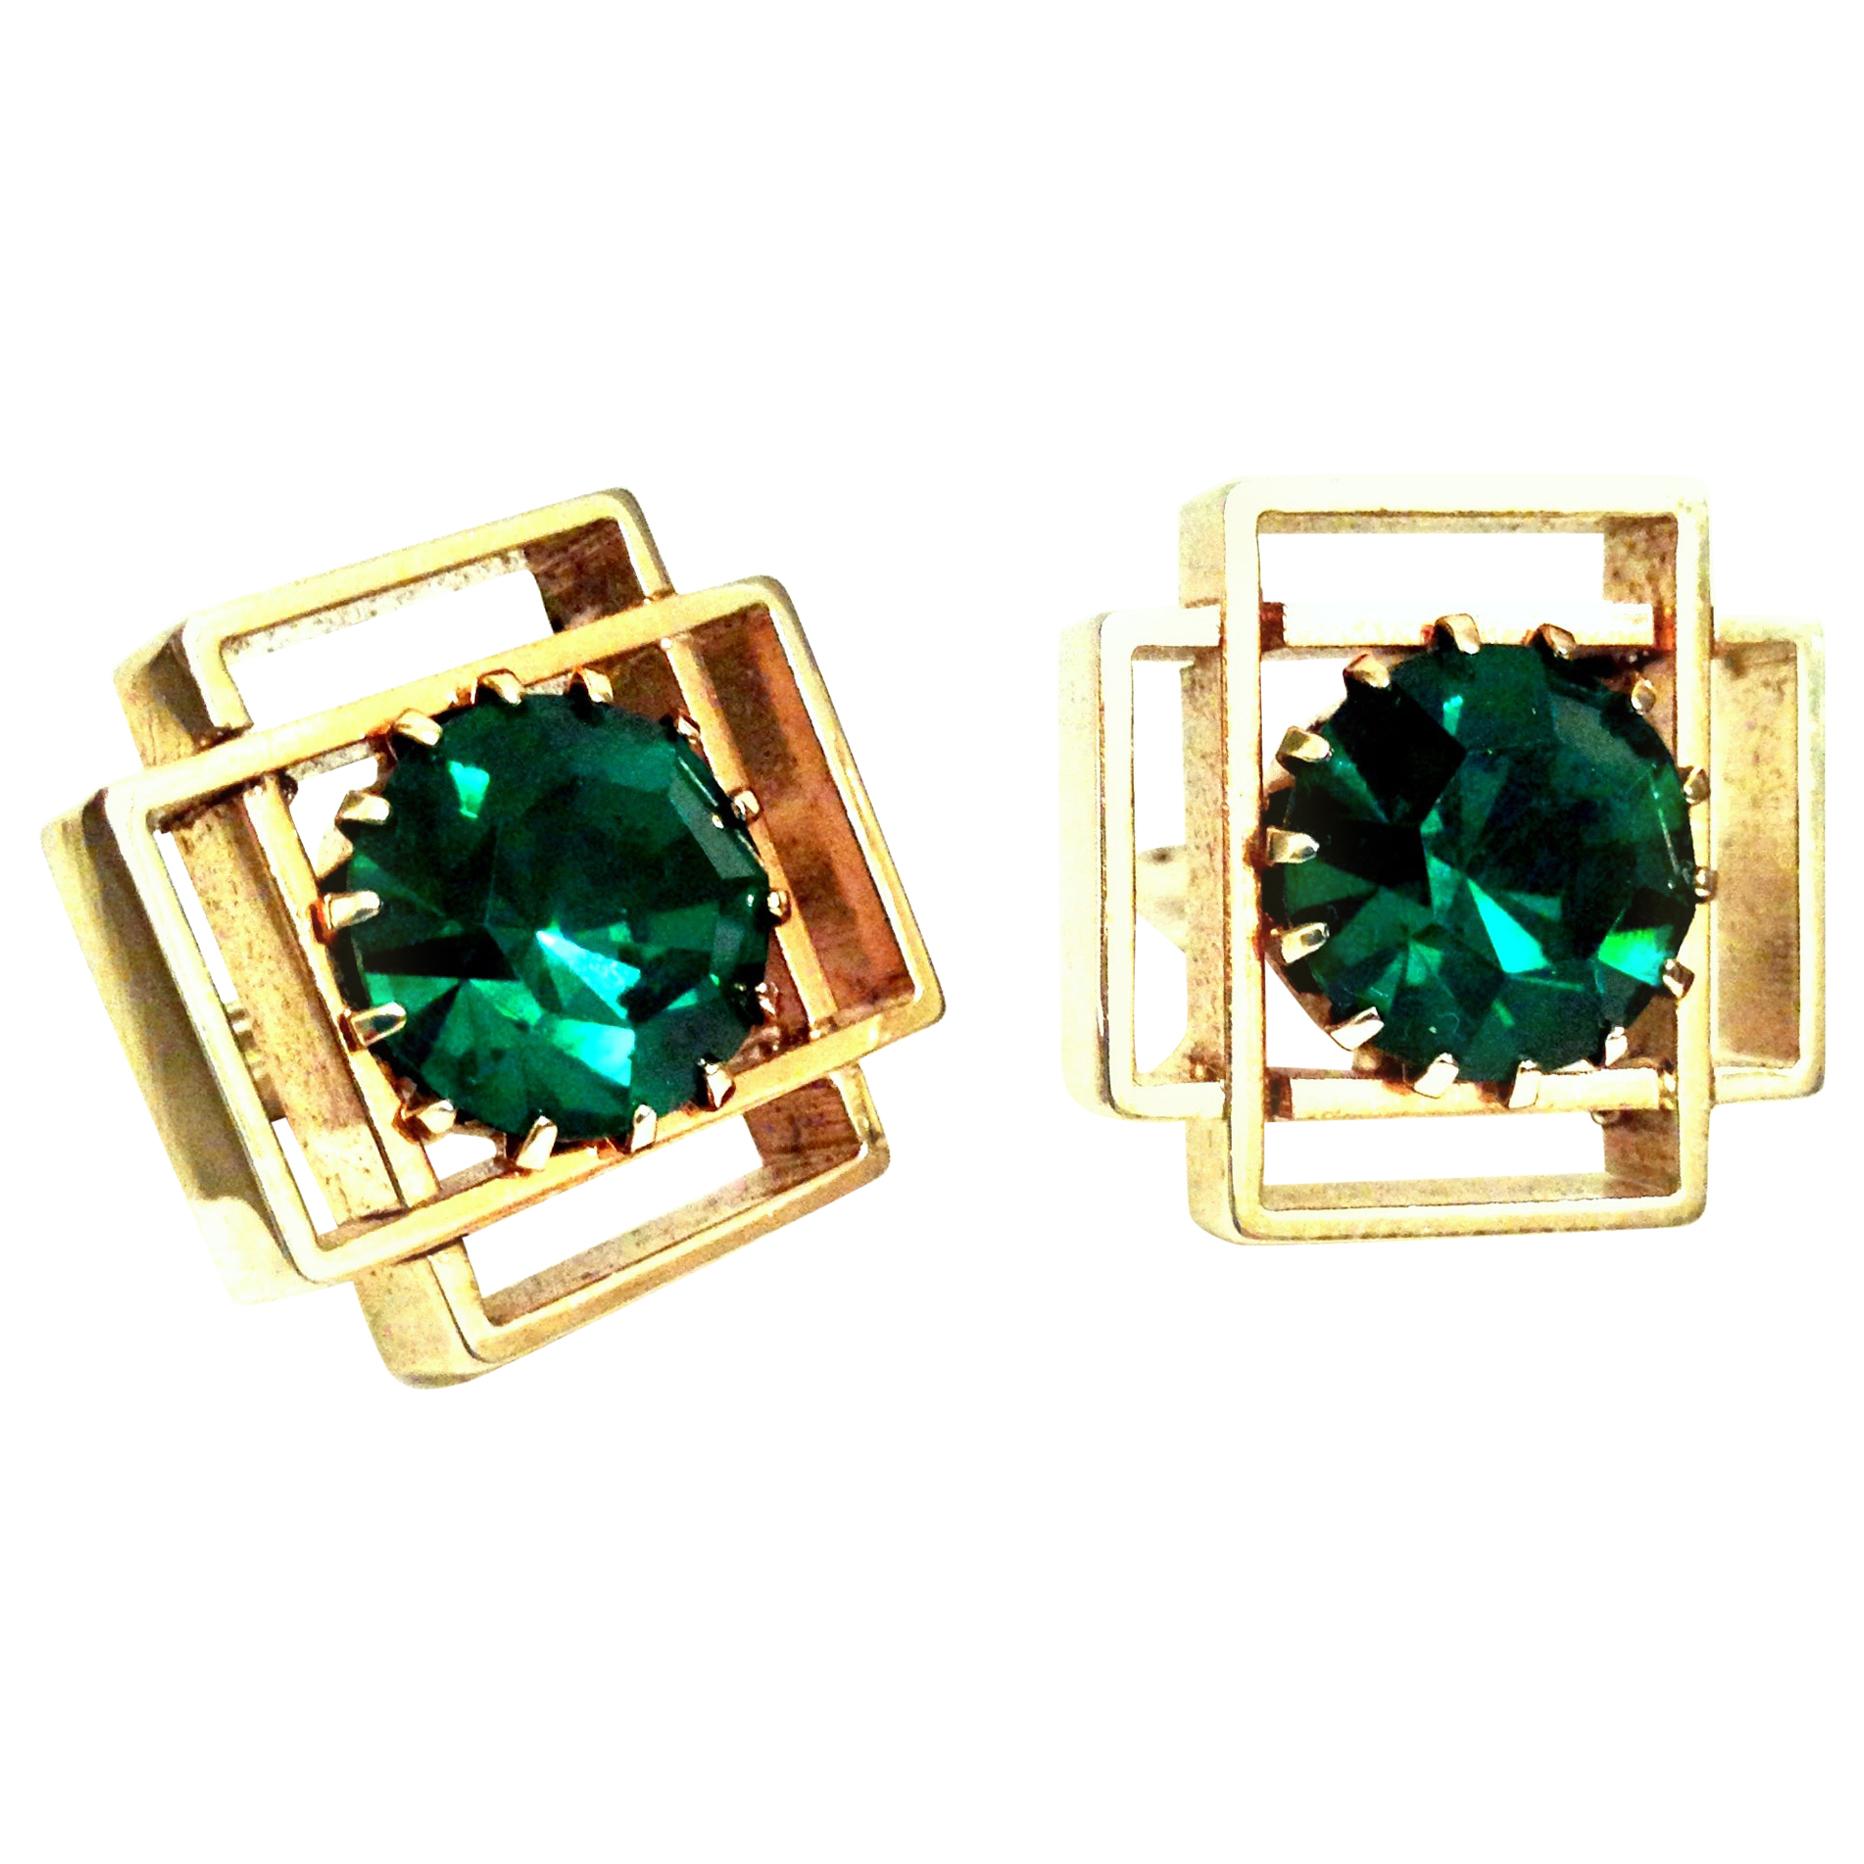 20th Century Pair Of Gold Plate & Austrian Crystal Geometric Cufflinks For Sale